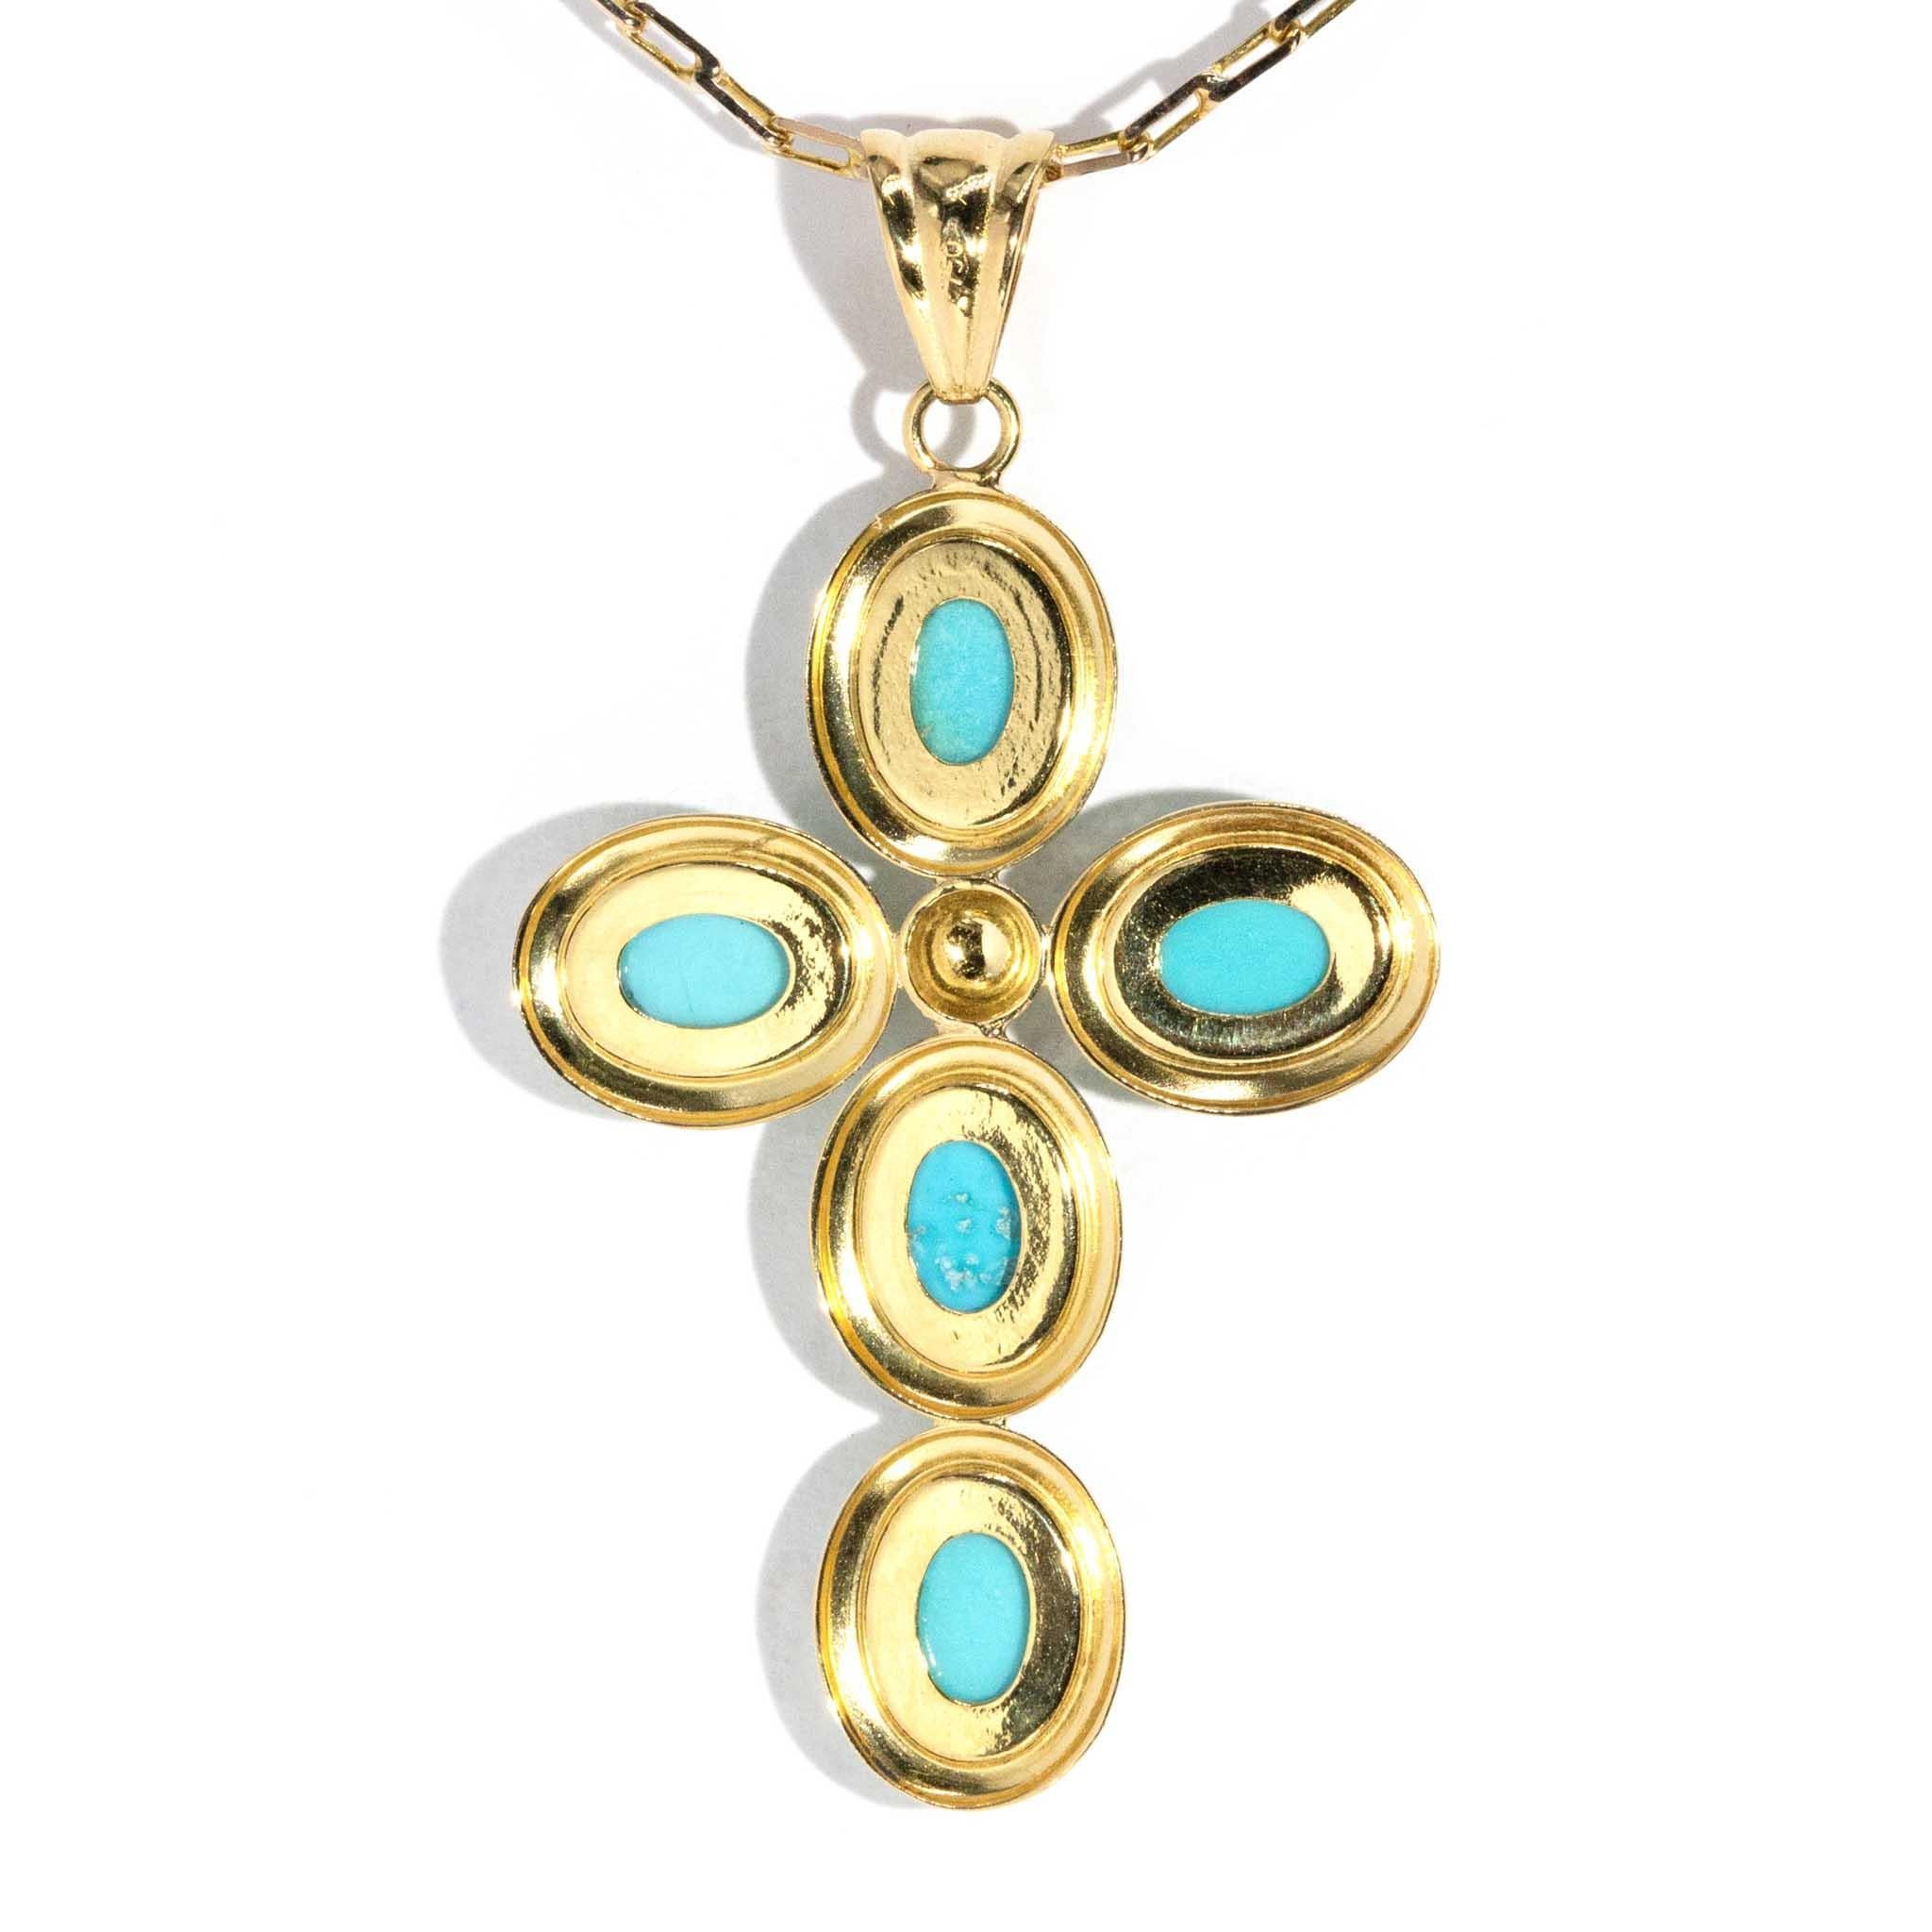 Vintage Circa 1990s Turquoise Cabochon Pendant & Chain 14 Carat Yellow Gold For Sale 1